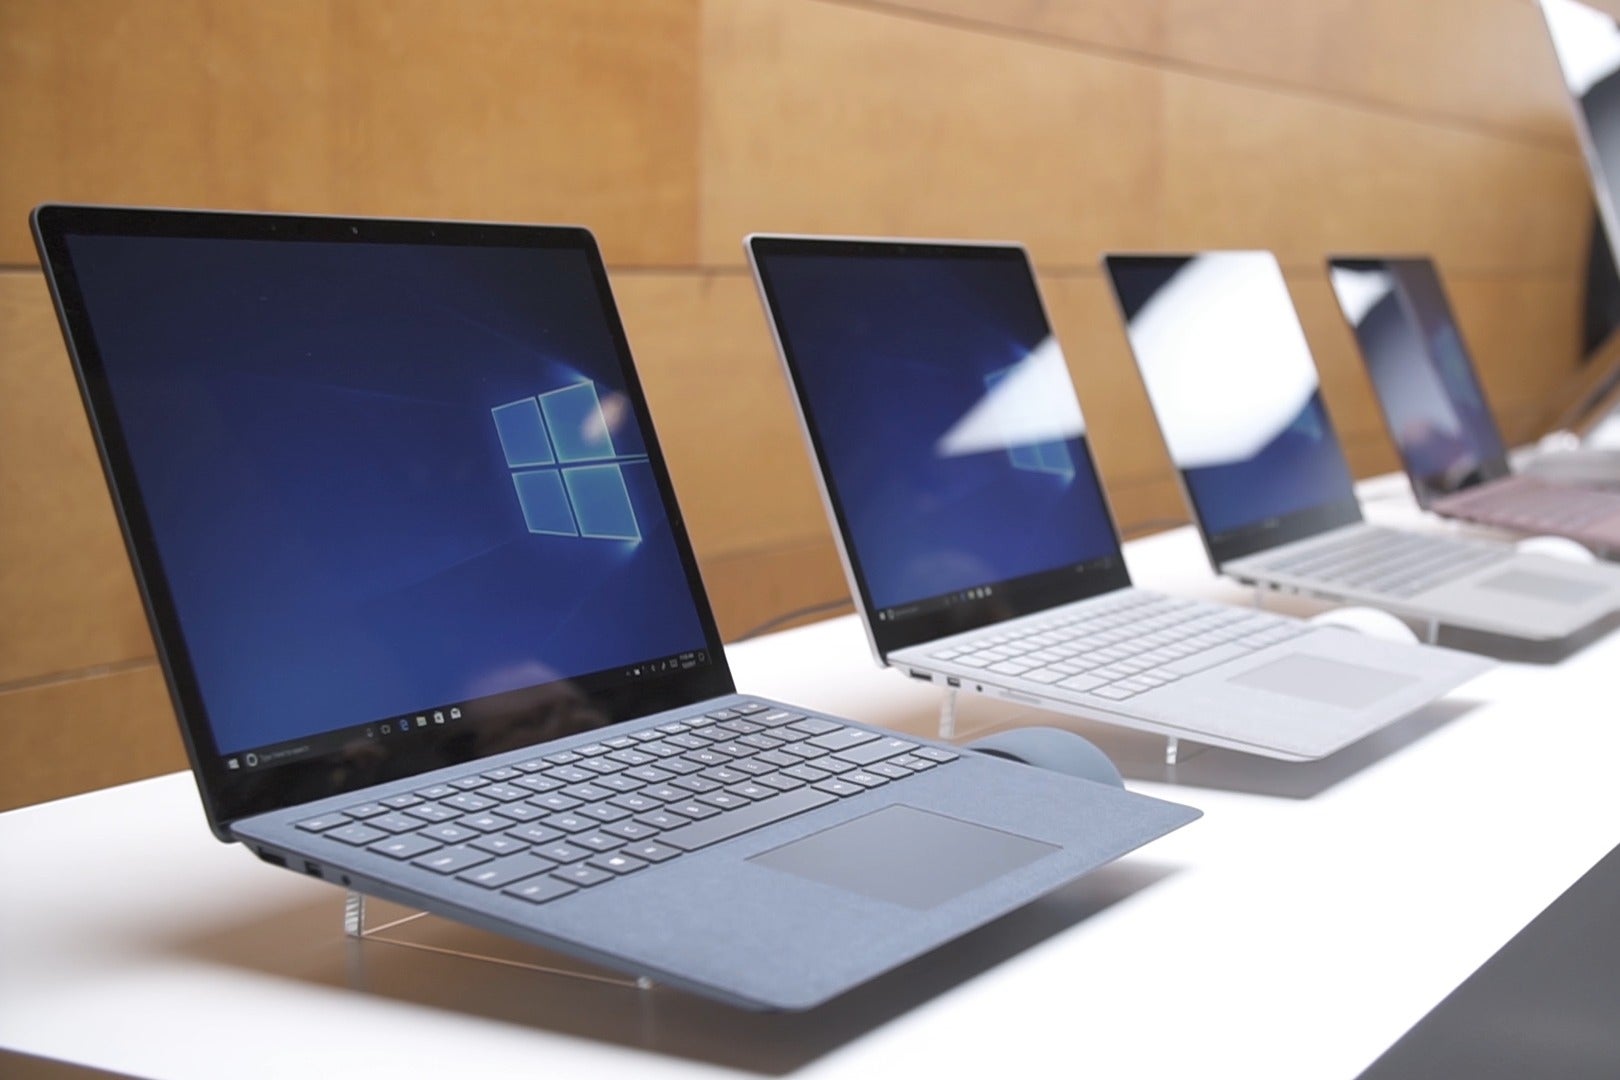 Hands-on: Surface Laptop is Microsoft's MacBook Air | PCWorld